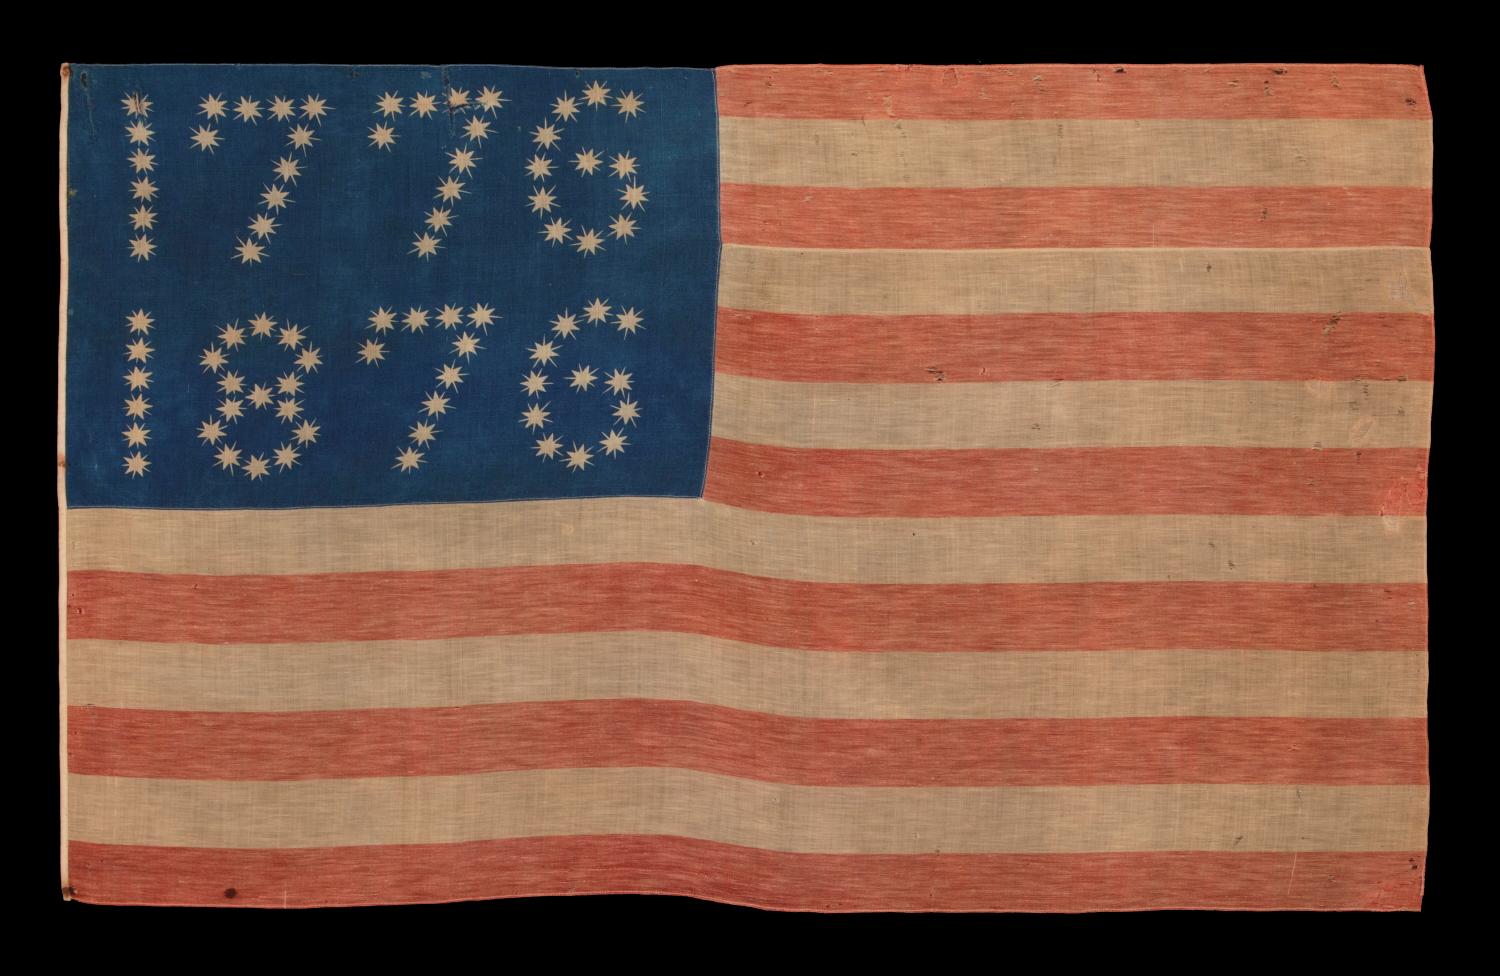 ANTIQUE AMERICAN FLAG WITH 10-POINTED STARS THAT SPELL “1776 – 1876”, MADE FOR THE 100-YEAR ANNIVERSARY OF AMERICAN INDEPENDENCE, ONE OF THE MOST GRAPHIC OF ALL EARLY EXAMPLES 

Many fantastic star patterns were made in the patriotism that